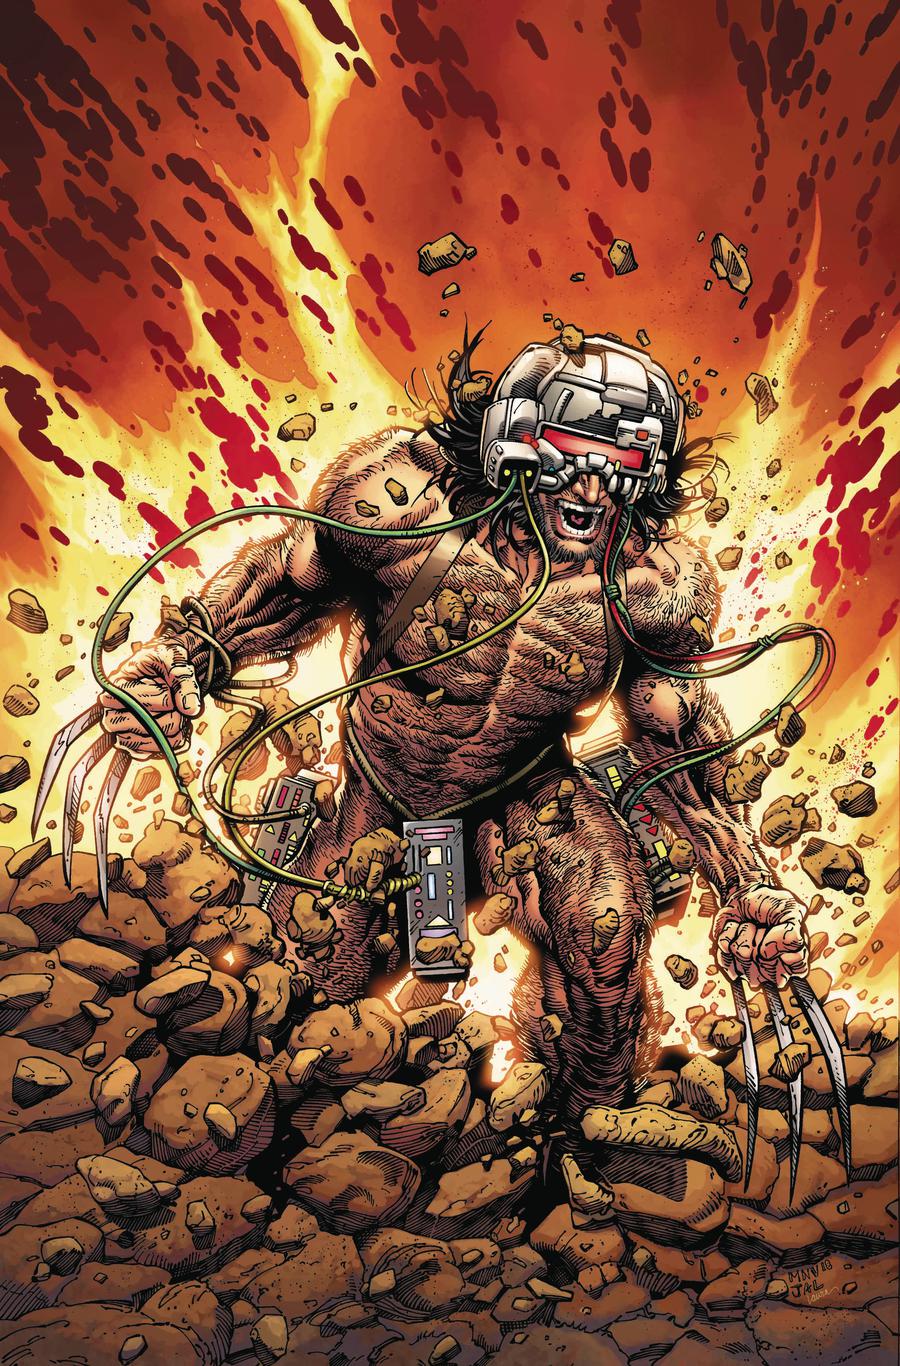 Return Of Wolverine #1 Cover F Variant Steve McNiven Weapon X Costume Cover